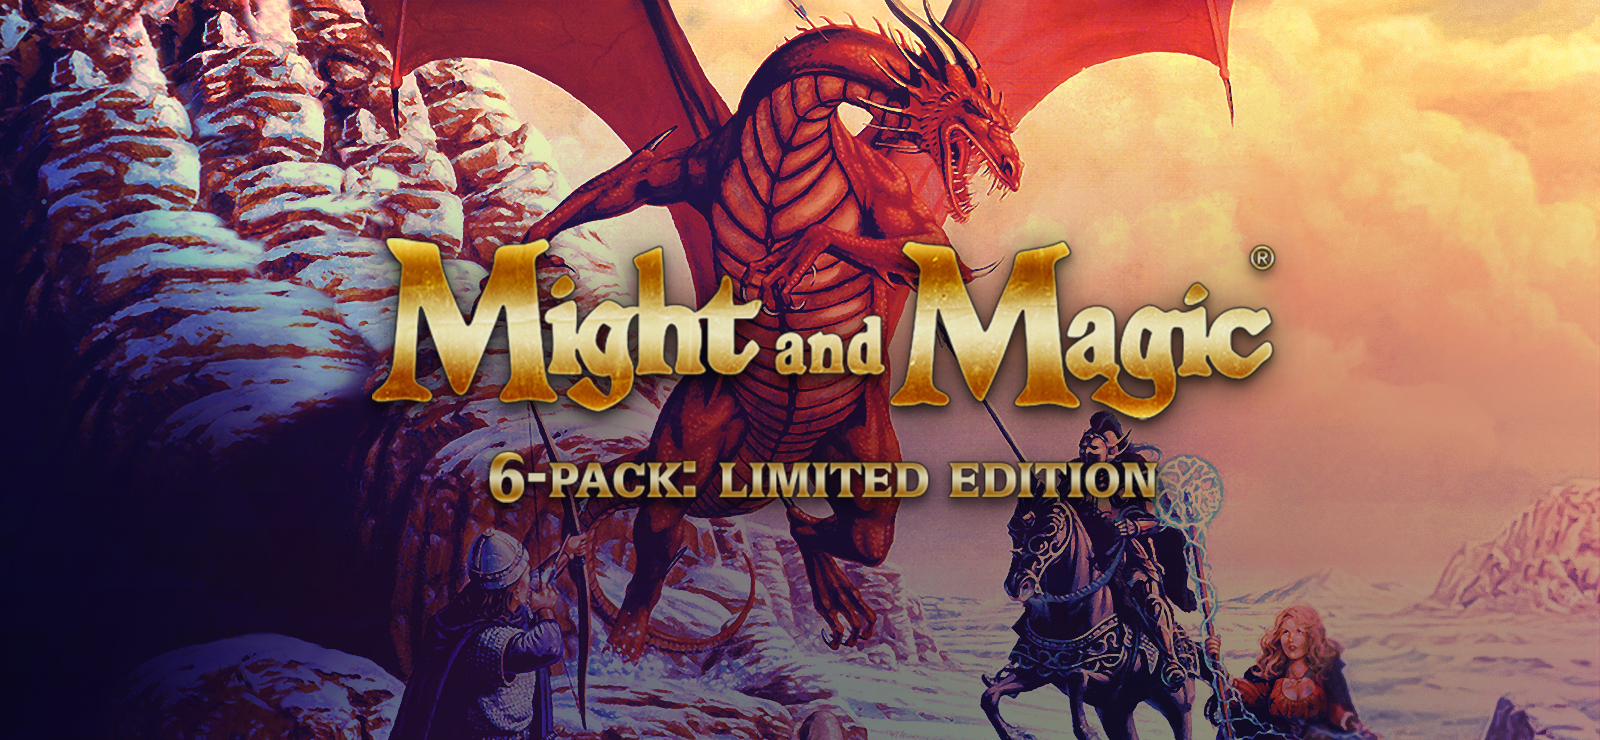 BESTSELLER - Might And Magic® 6-pack Limited Edition